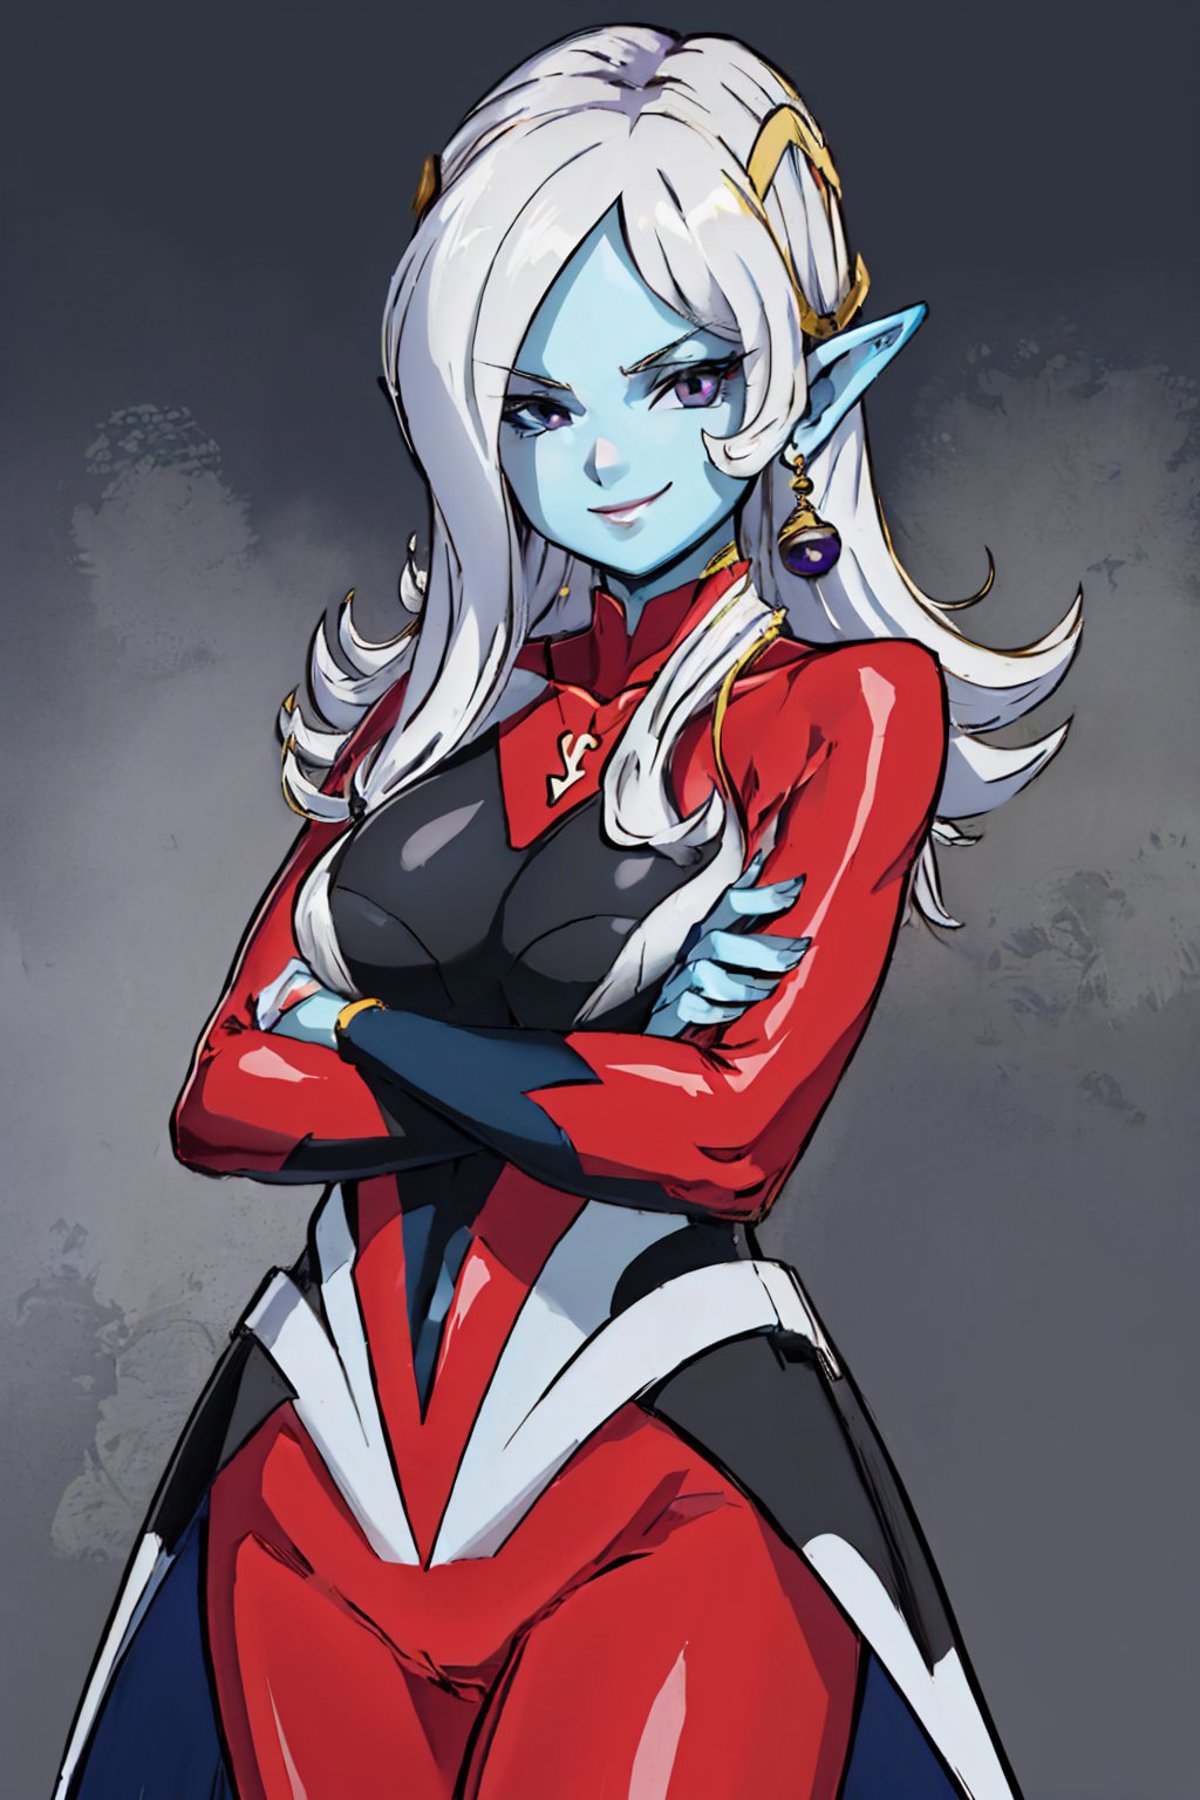 Towa | Dragon Ball Online image by justTNP